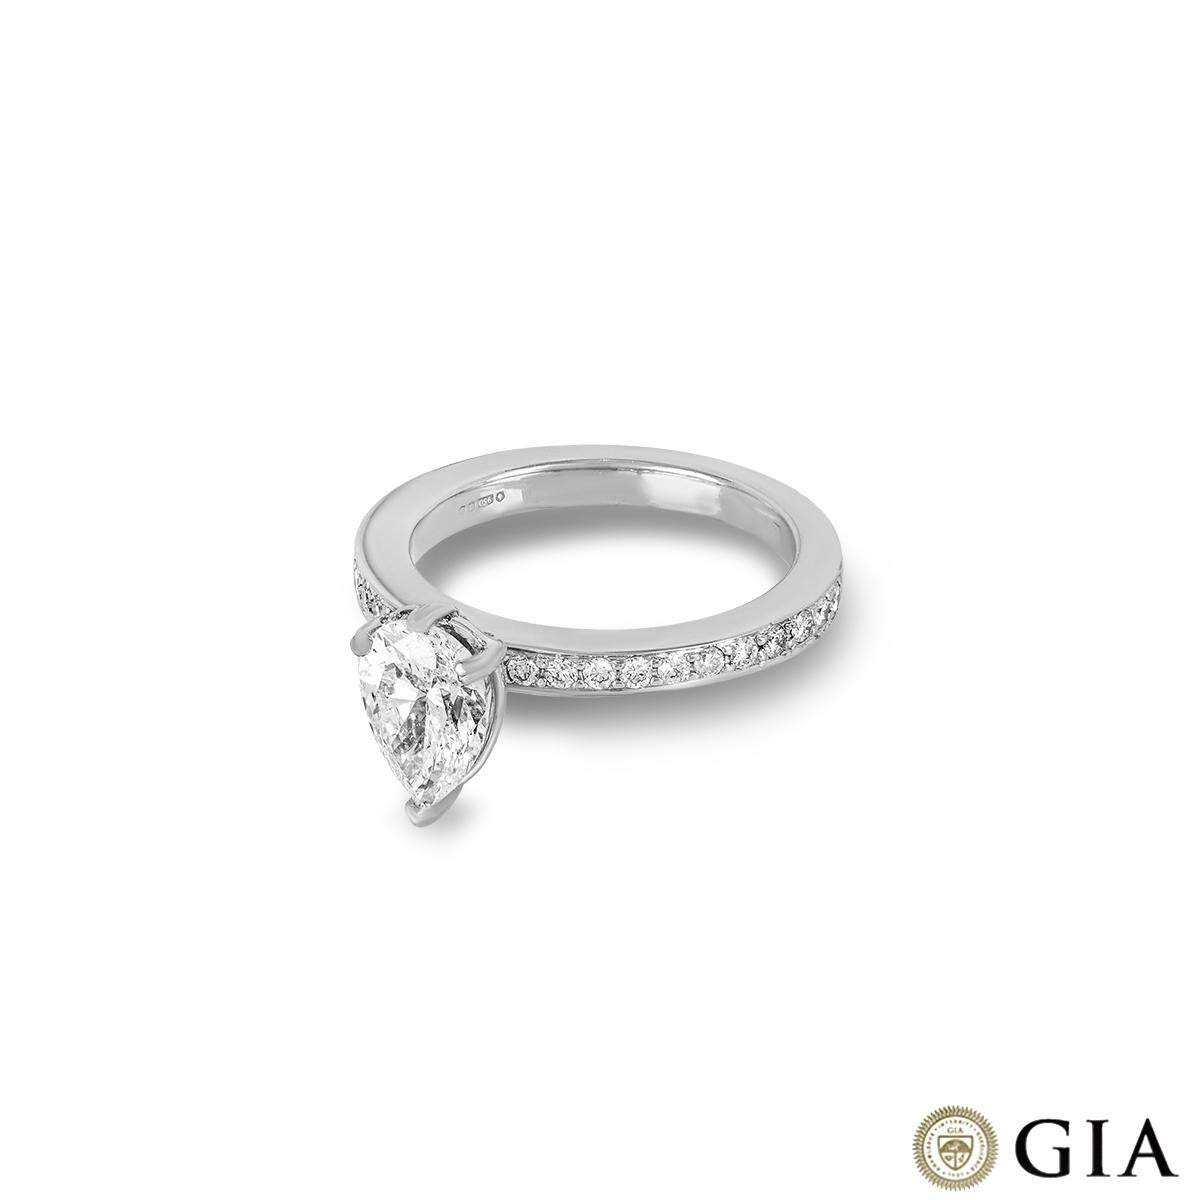 GIA Certified Pear Shape Diamond Engagement Ring 1.21 Carat G/VS1 For Sale 2